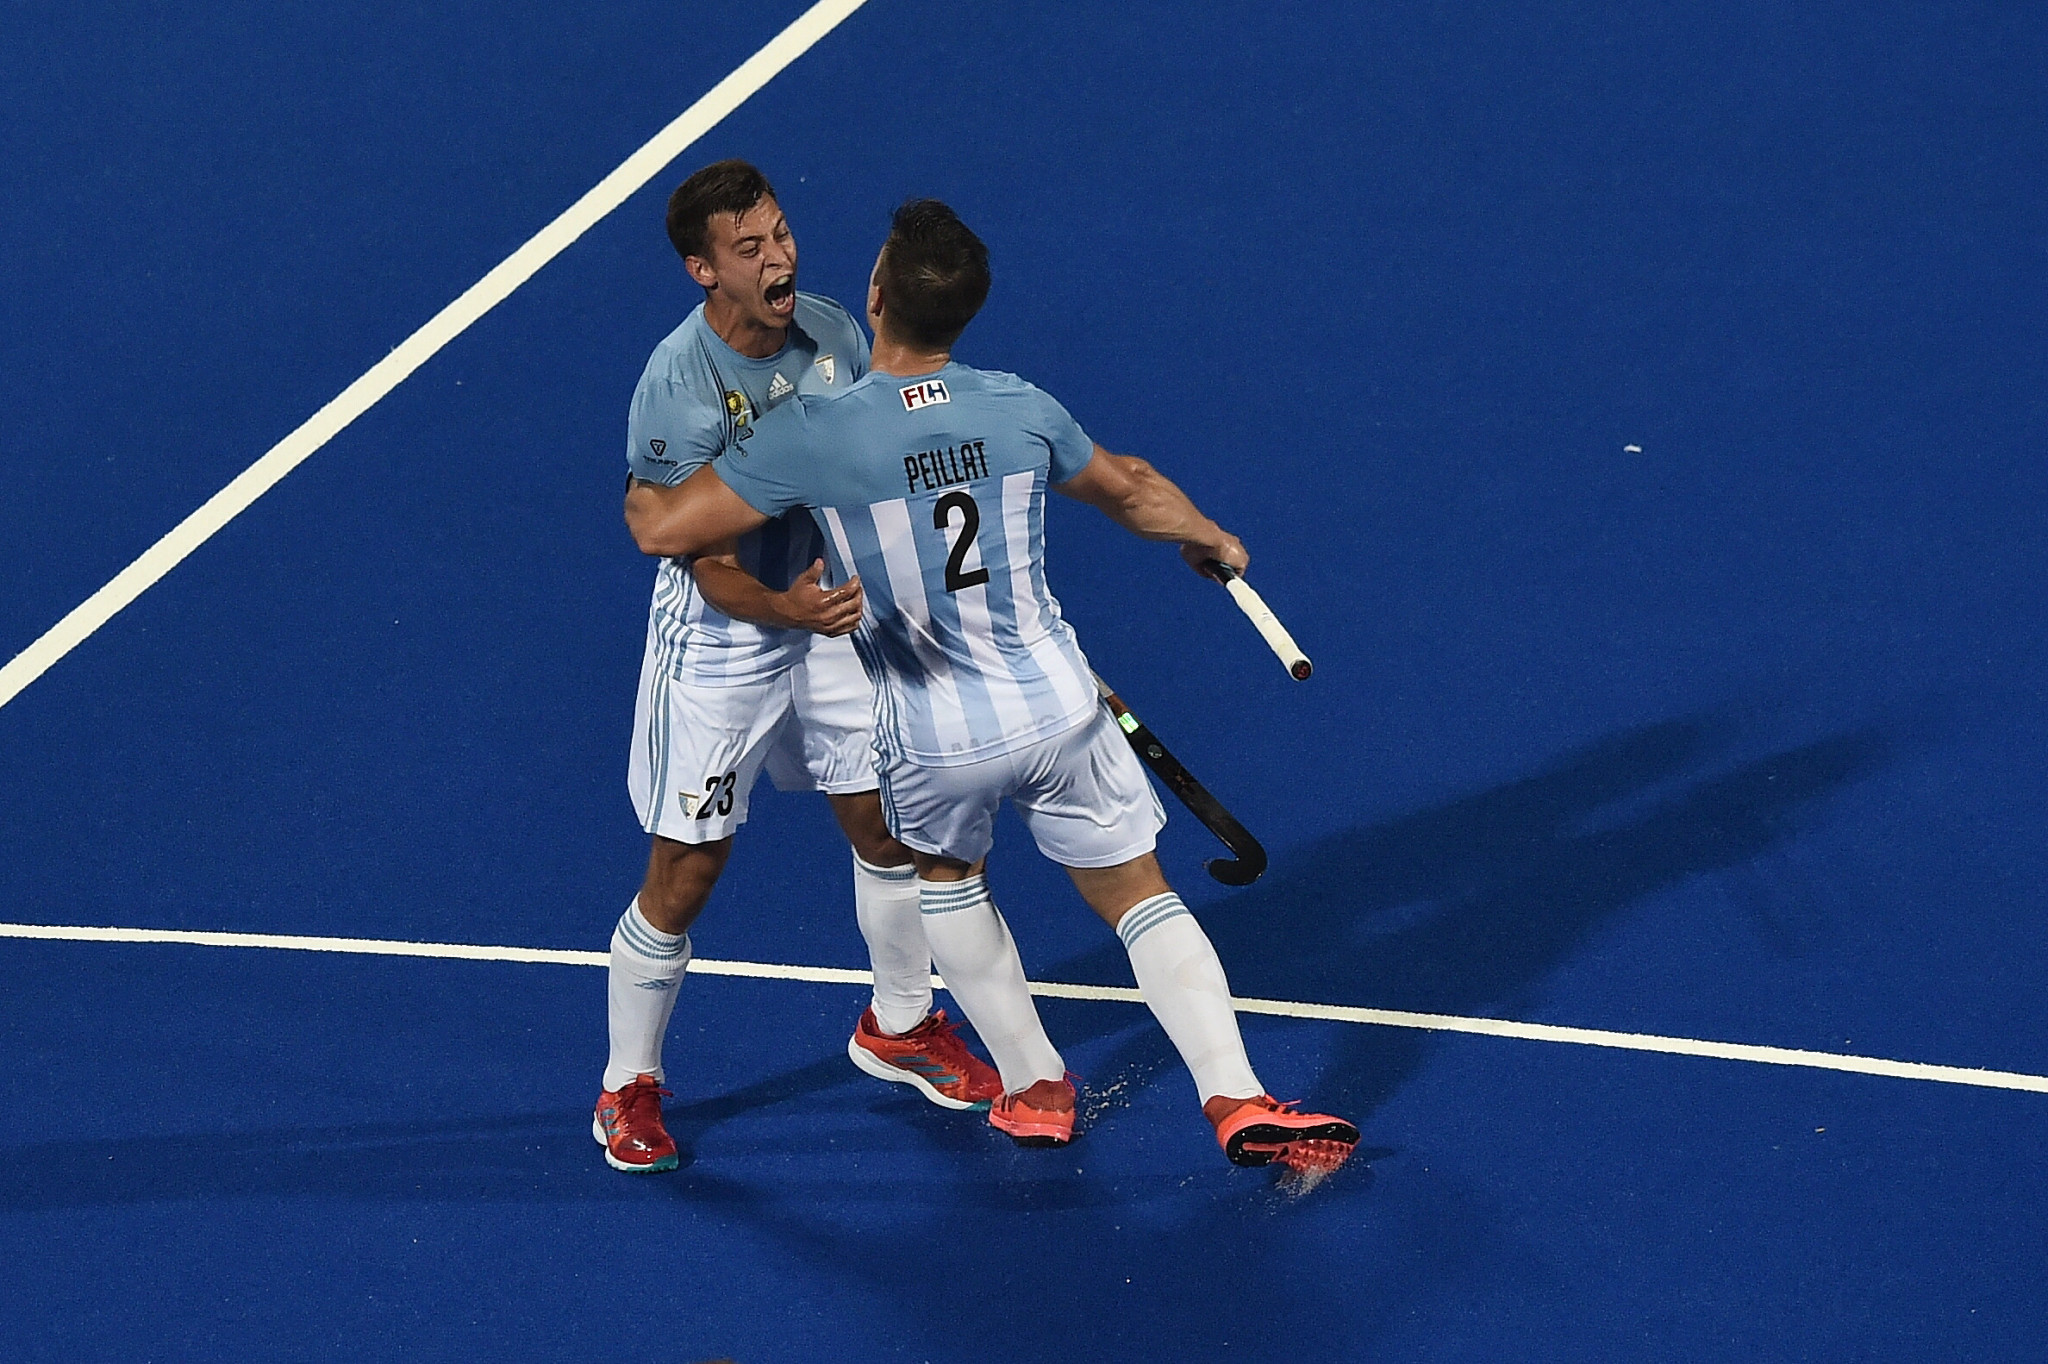 Argentina sweep aside New Zealand to take control of Pool A at Men's Hockey World Cup